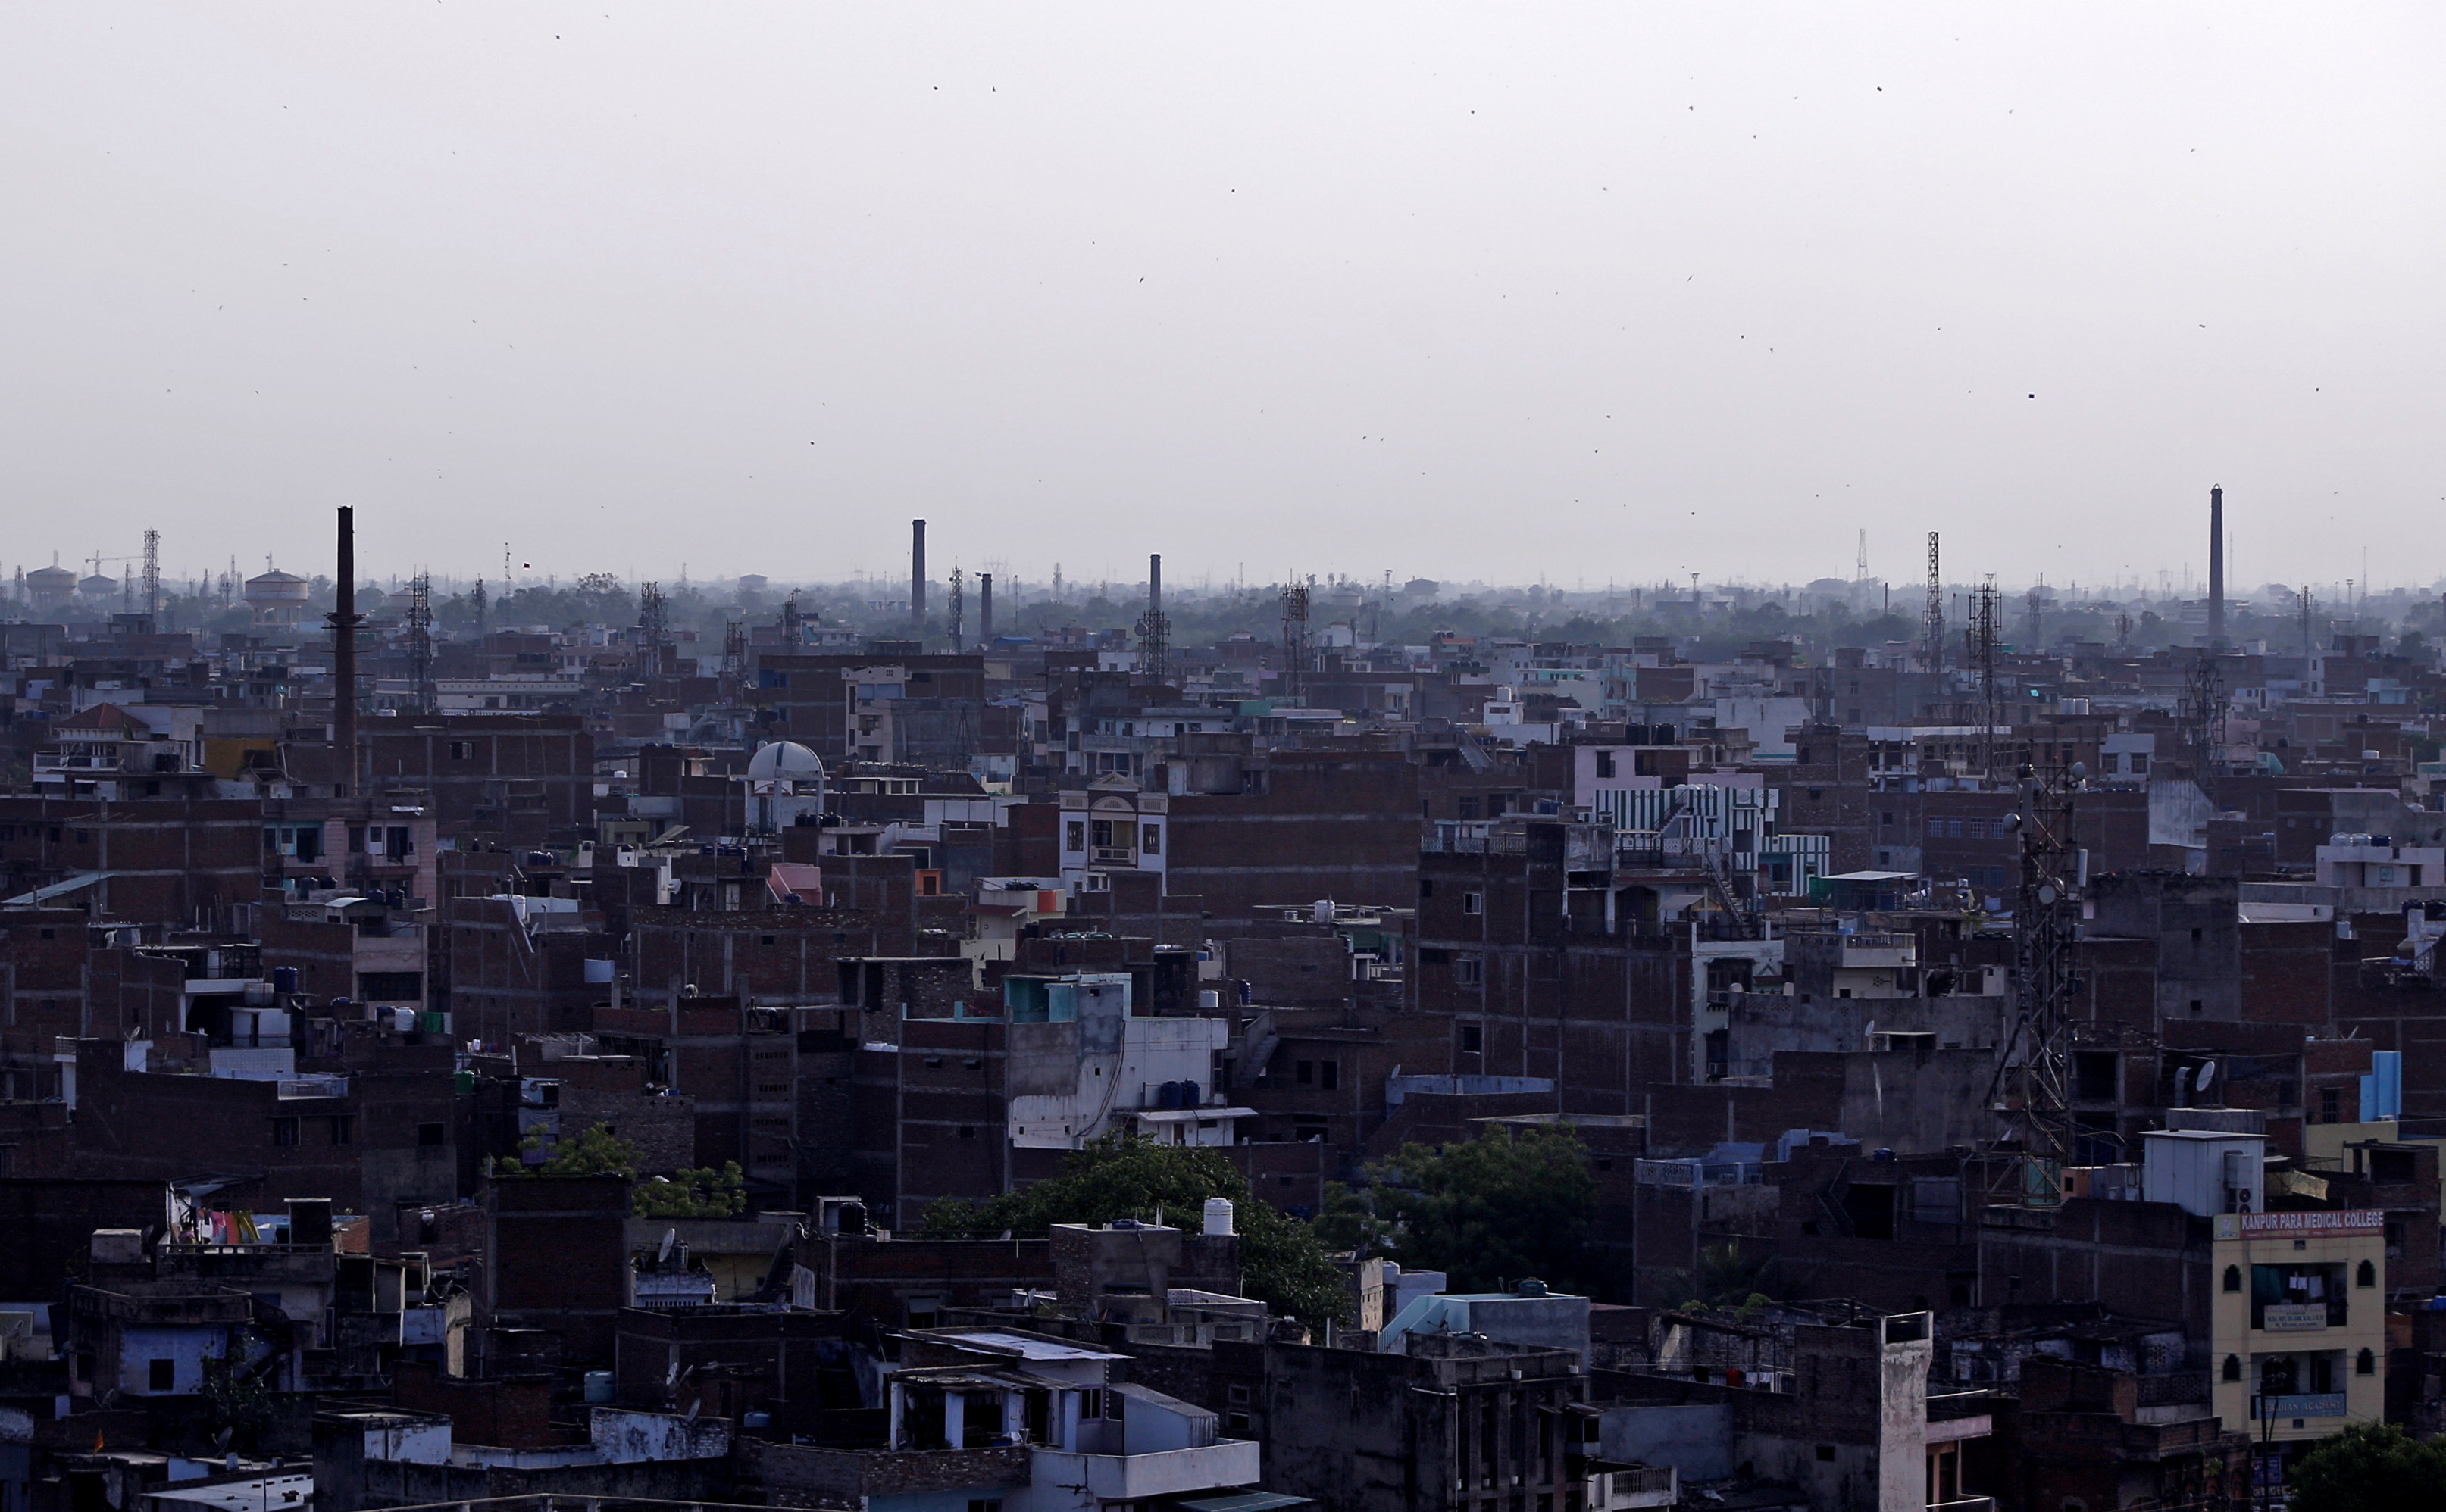 Chimneys of leather tanneries are seen in Kanpur